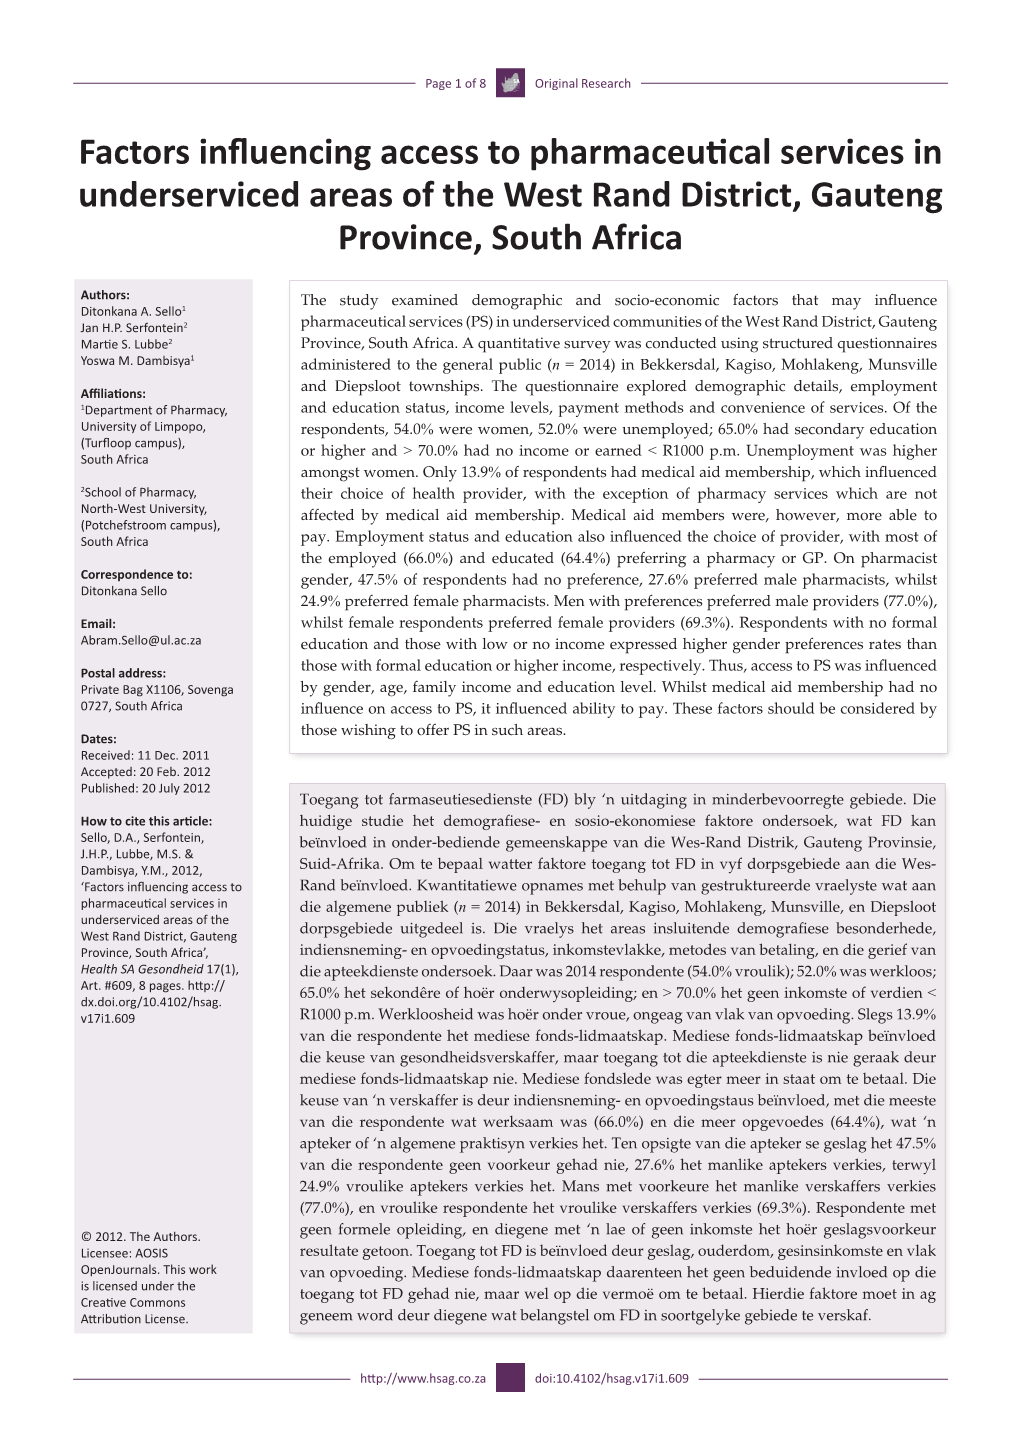 Factors Influencing Access to Pharmaceutical Services in Underserviced Areas of the West Rand District, Gauteng Province, South Africa